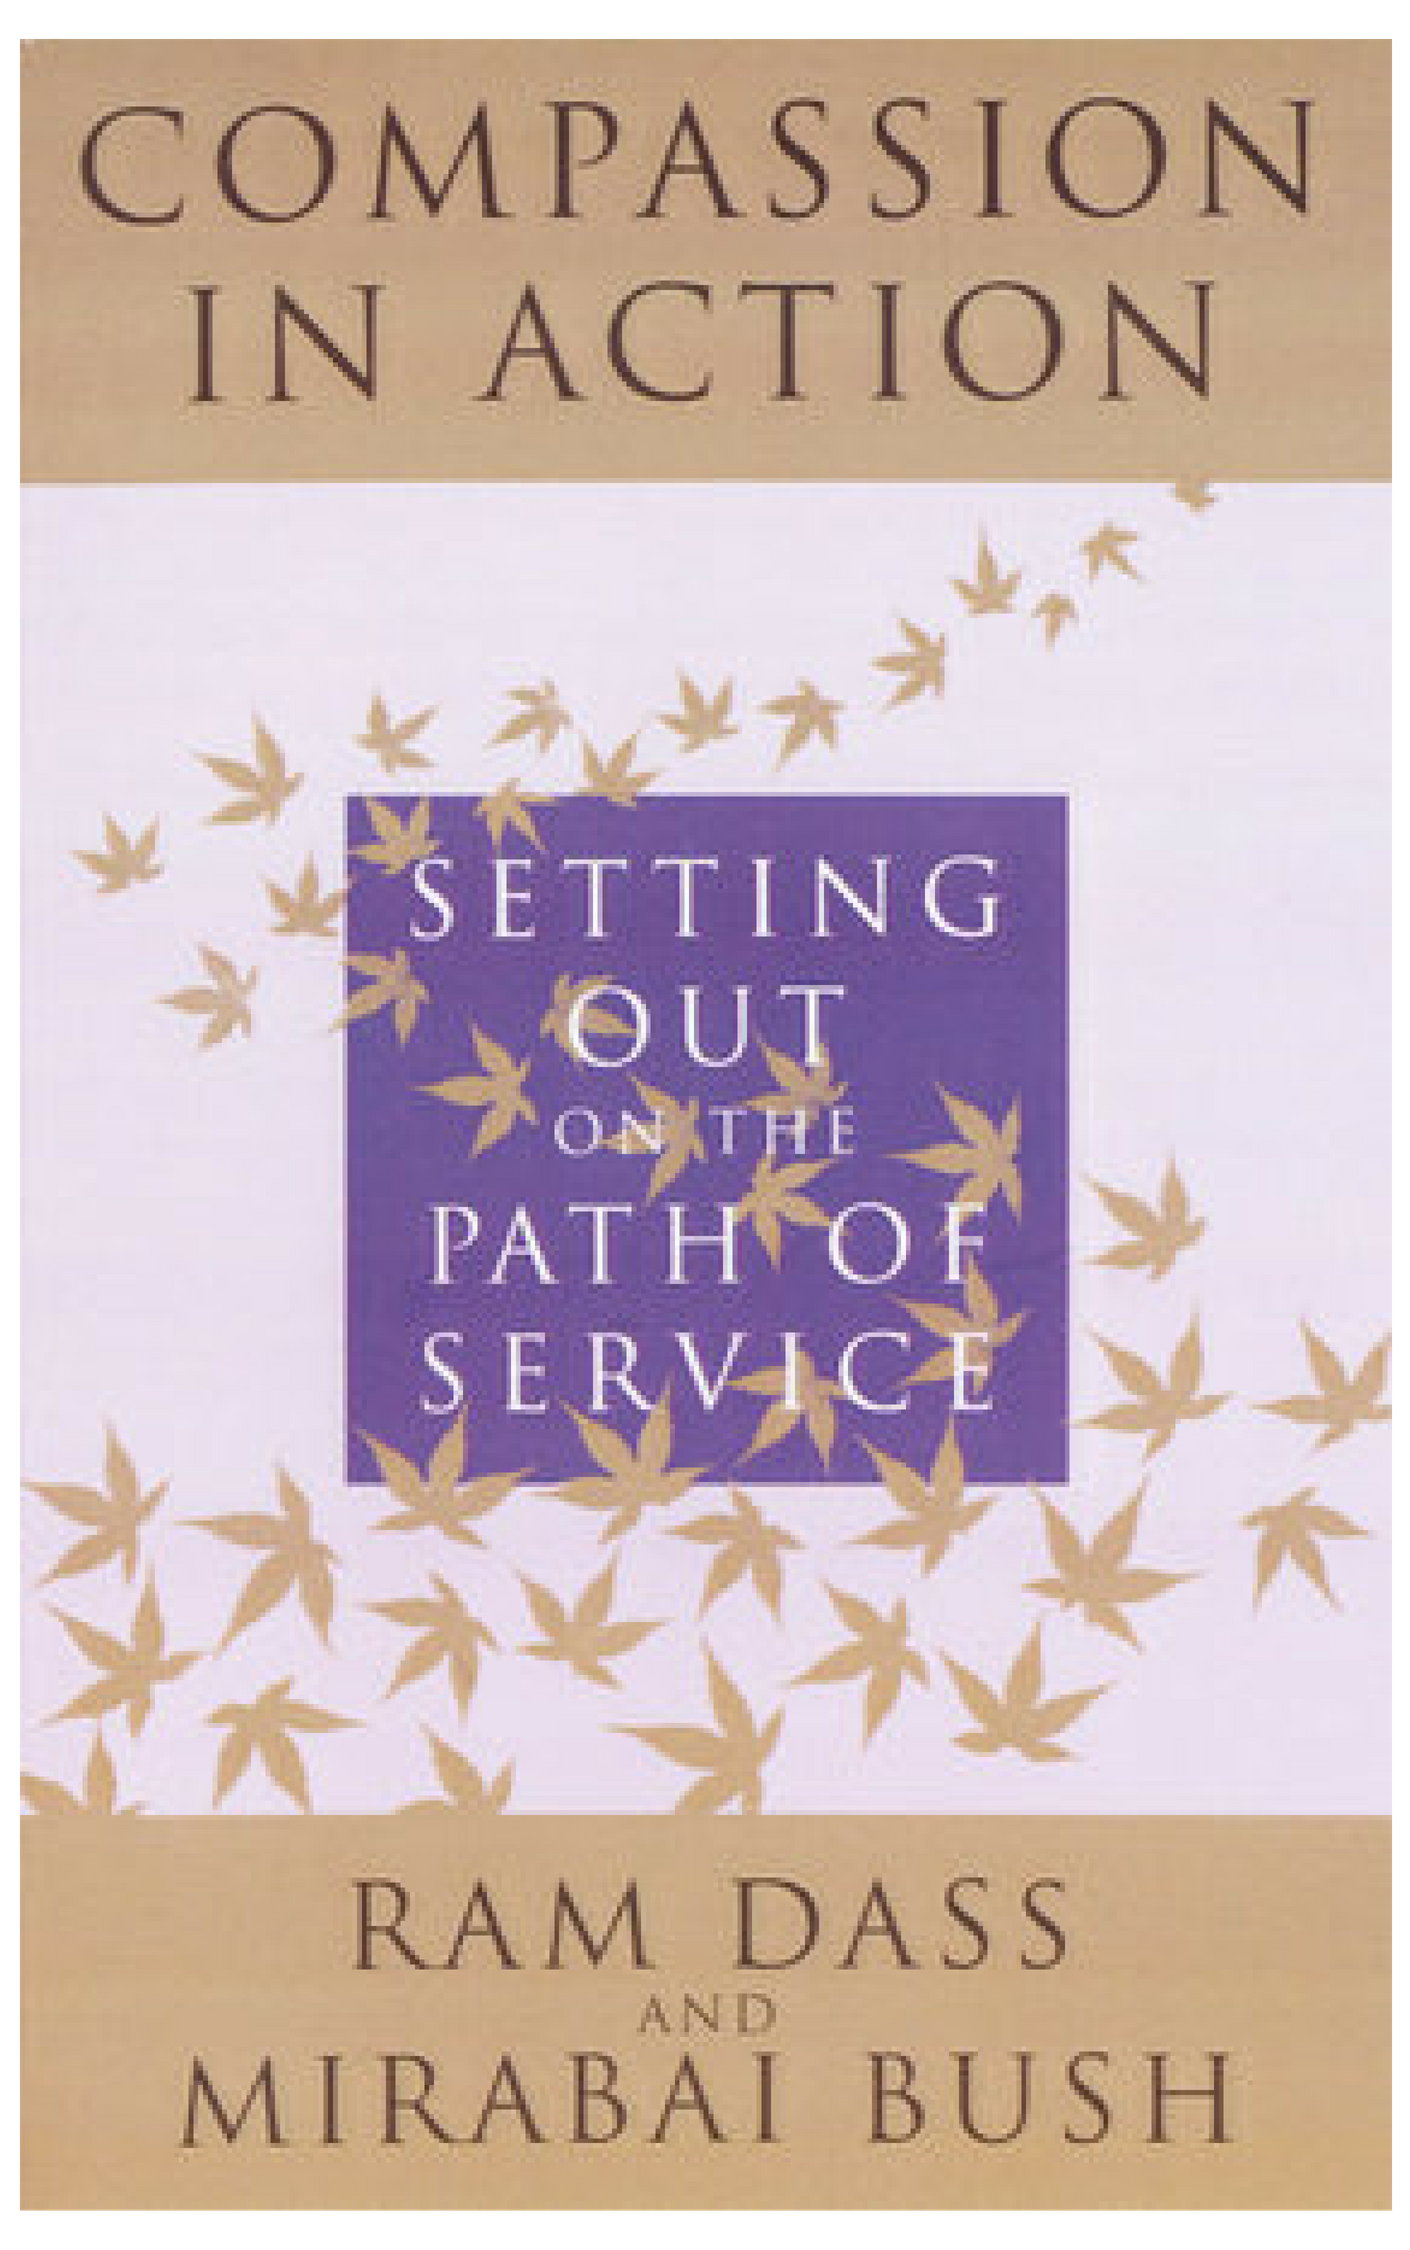 Compassion in Action: Setting out on the Path of Service